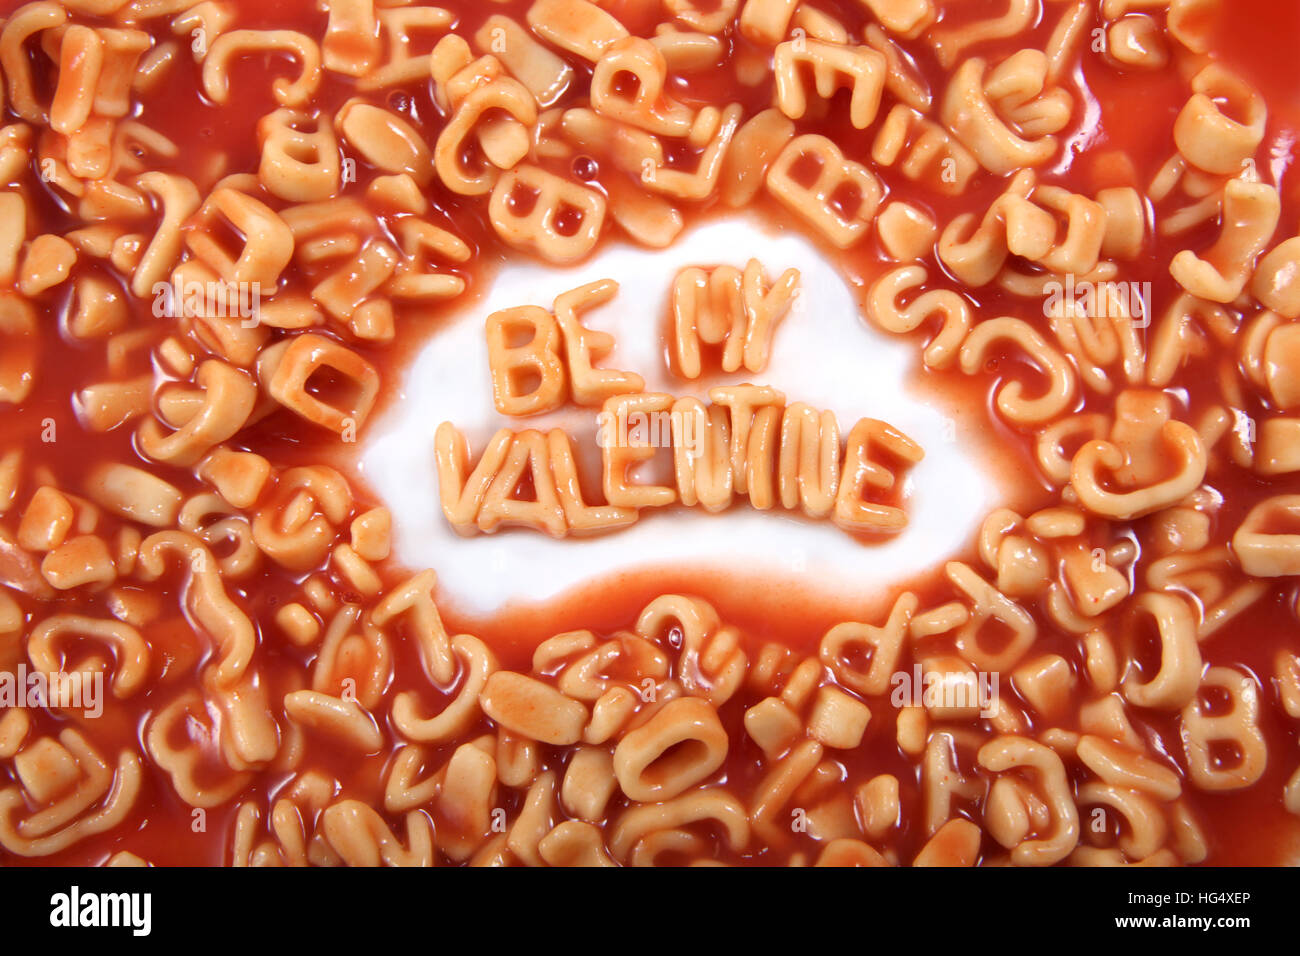 'Be my Valentine' written in spaghetti pasta letters for Valentines Day. Stock Photo